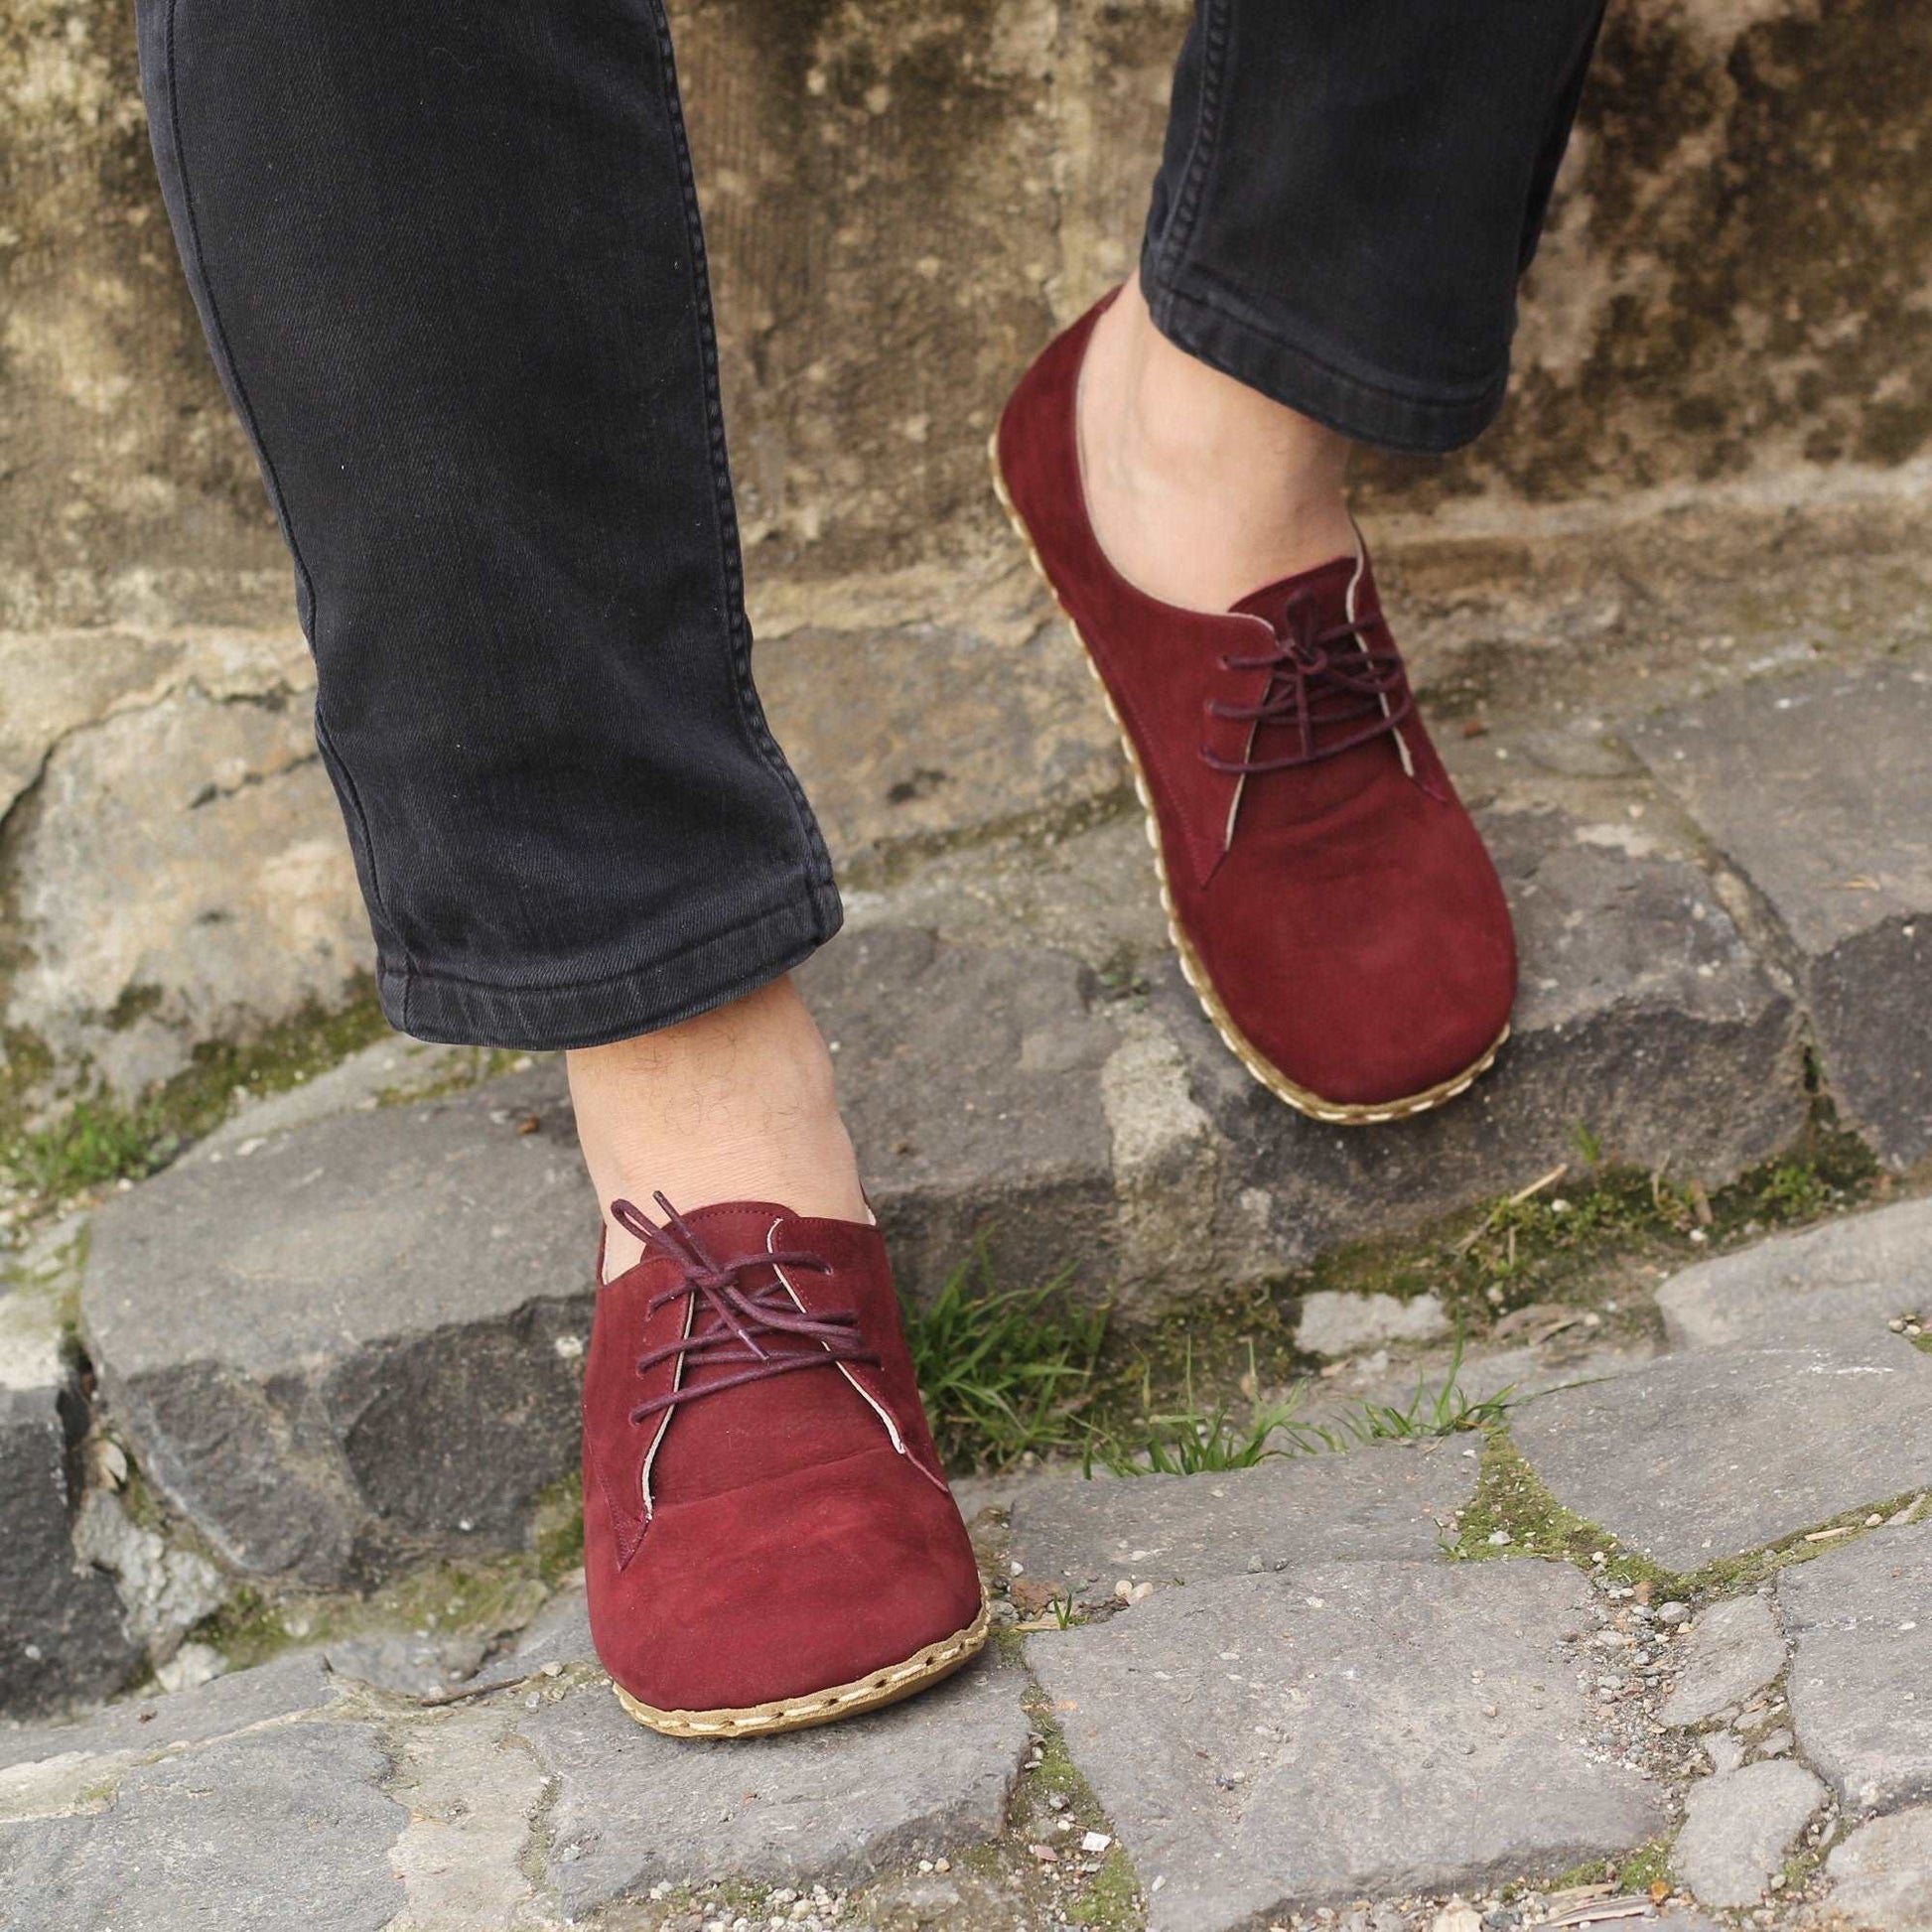 Men Barefoot Shoes, Handmade, Claret Red Nubuck Leather, Laced Oxford Copper Rivet